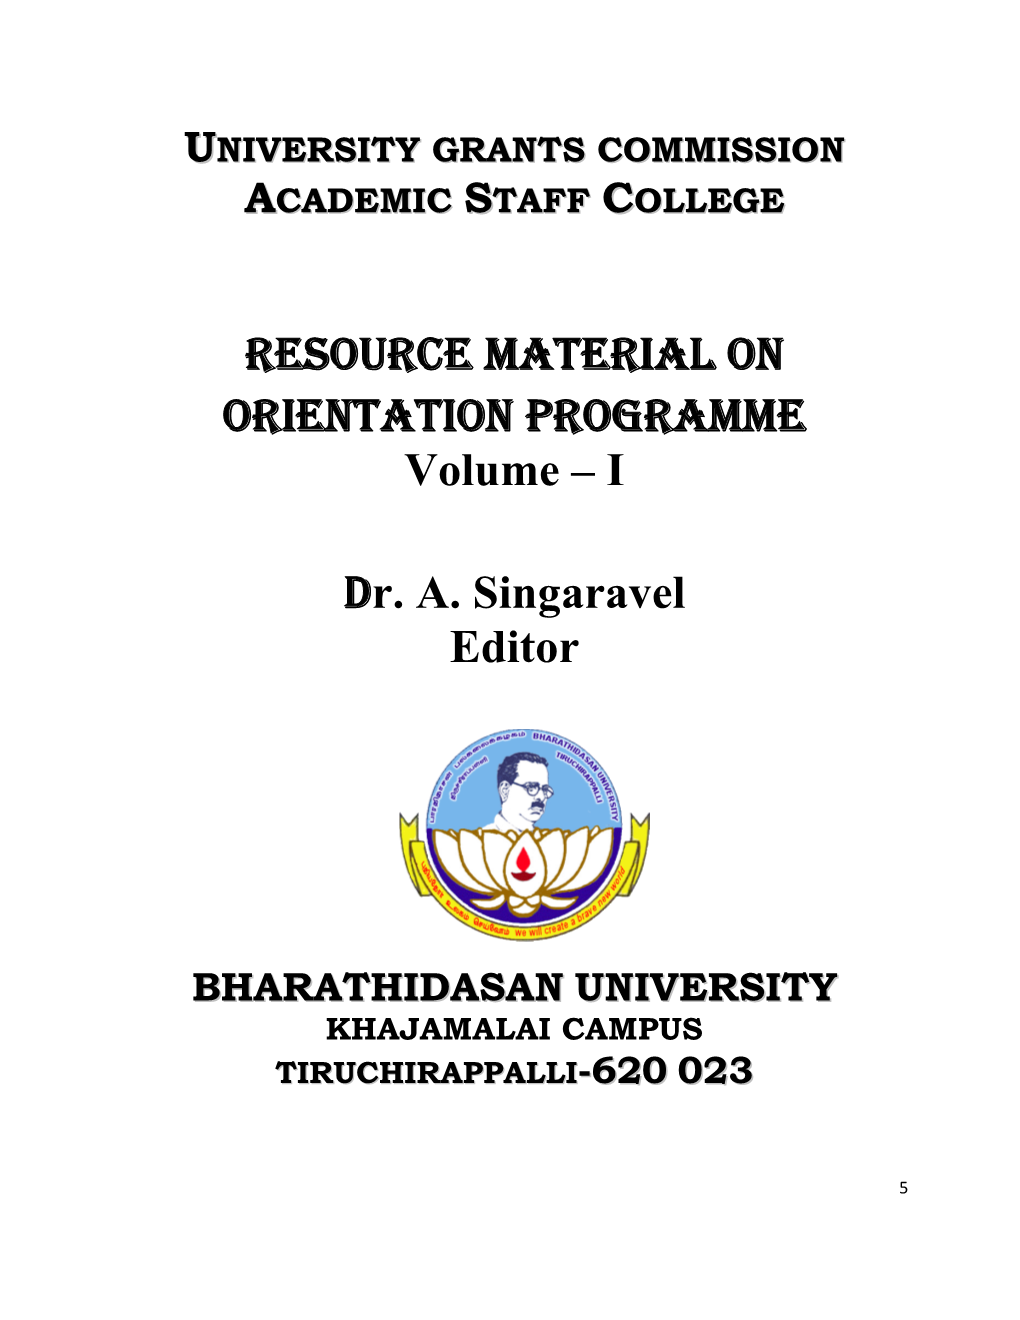 RESOURCE MATERIAL on ORIENTATION PROGRAMME Volume – I